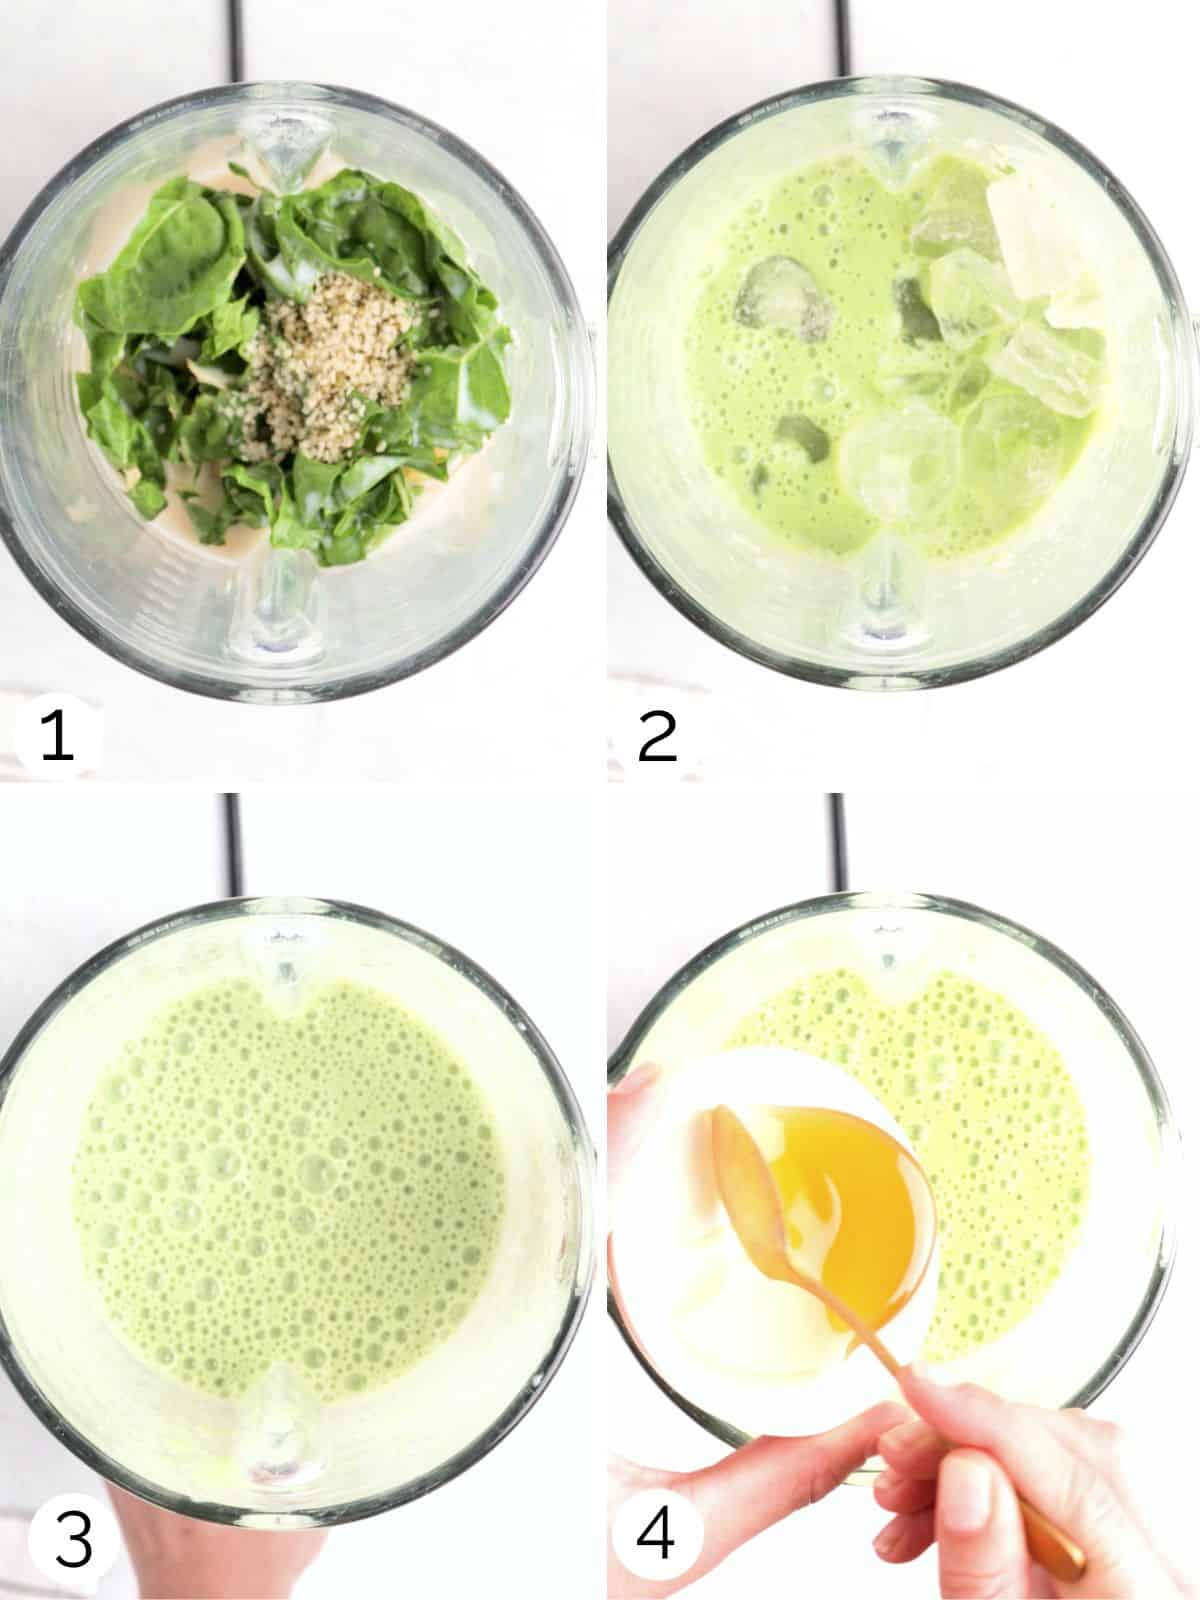 Process photos for making a green anti-inflammatory smoothie by adding spinach and pears, blending, and adding ice.